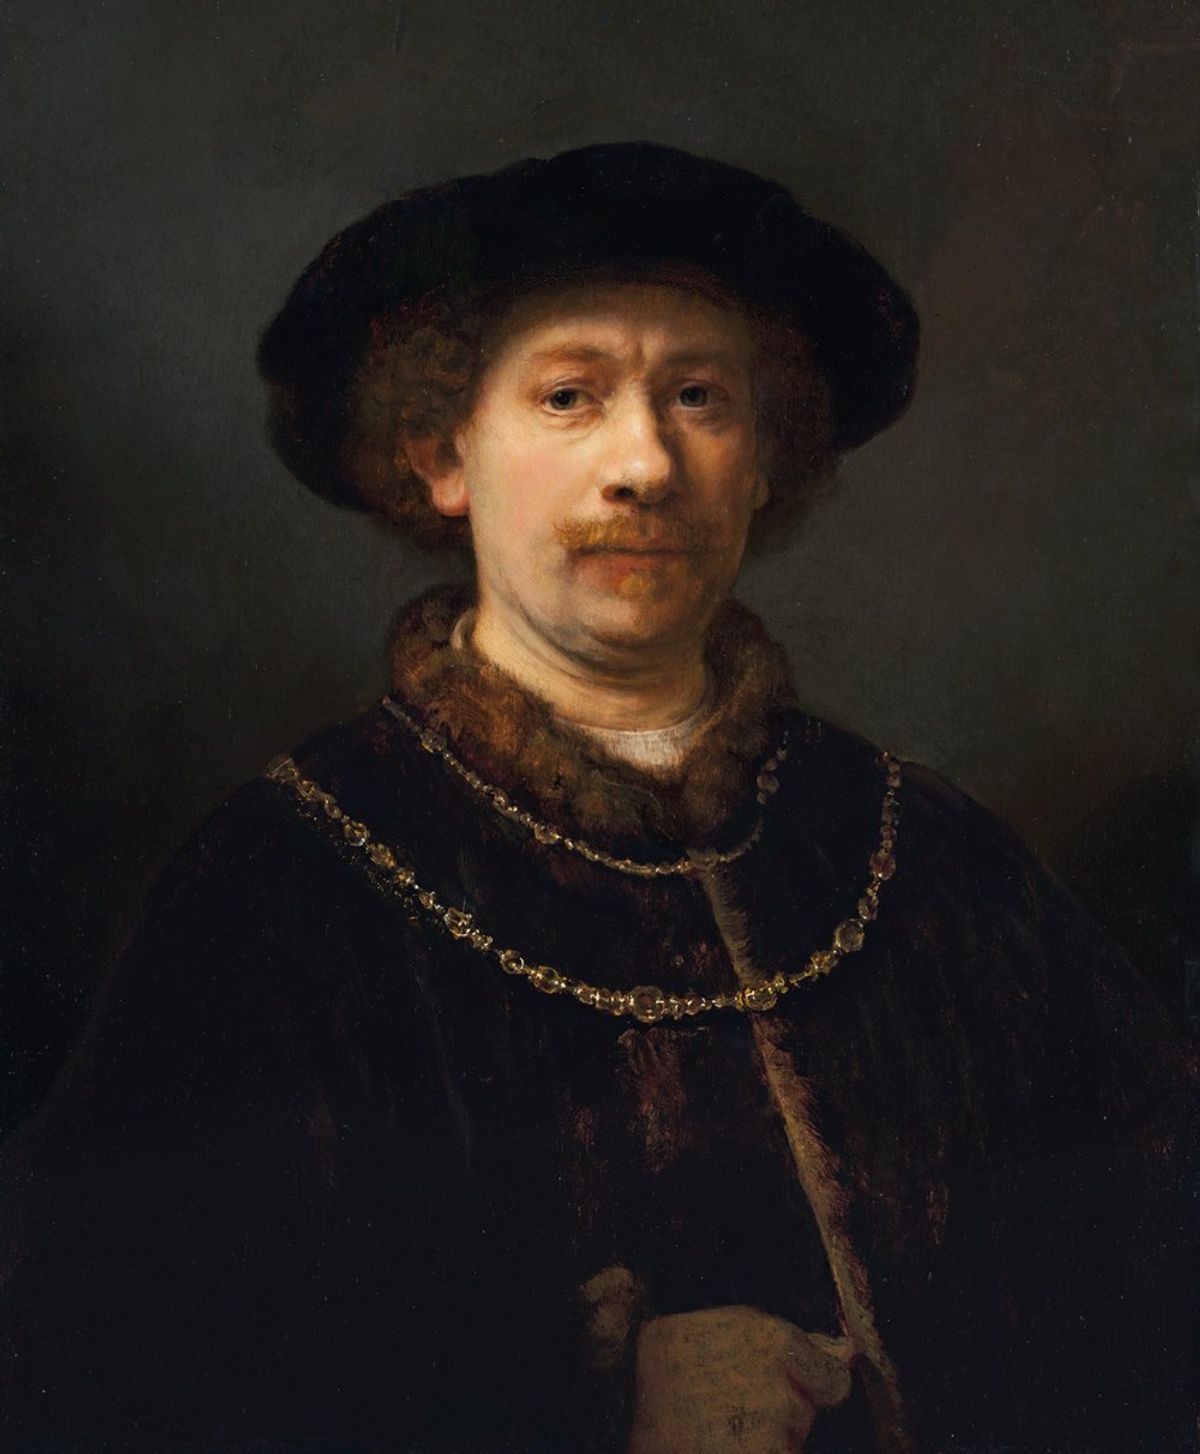 Rembrandt van Rijn, Self-portrait Wearing a Hat and Two Chains, (1642-43), oil on panel Photo © Museo Nacional Thyssen-Bornemisza, Madrid